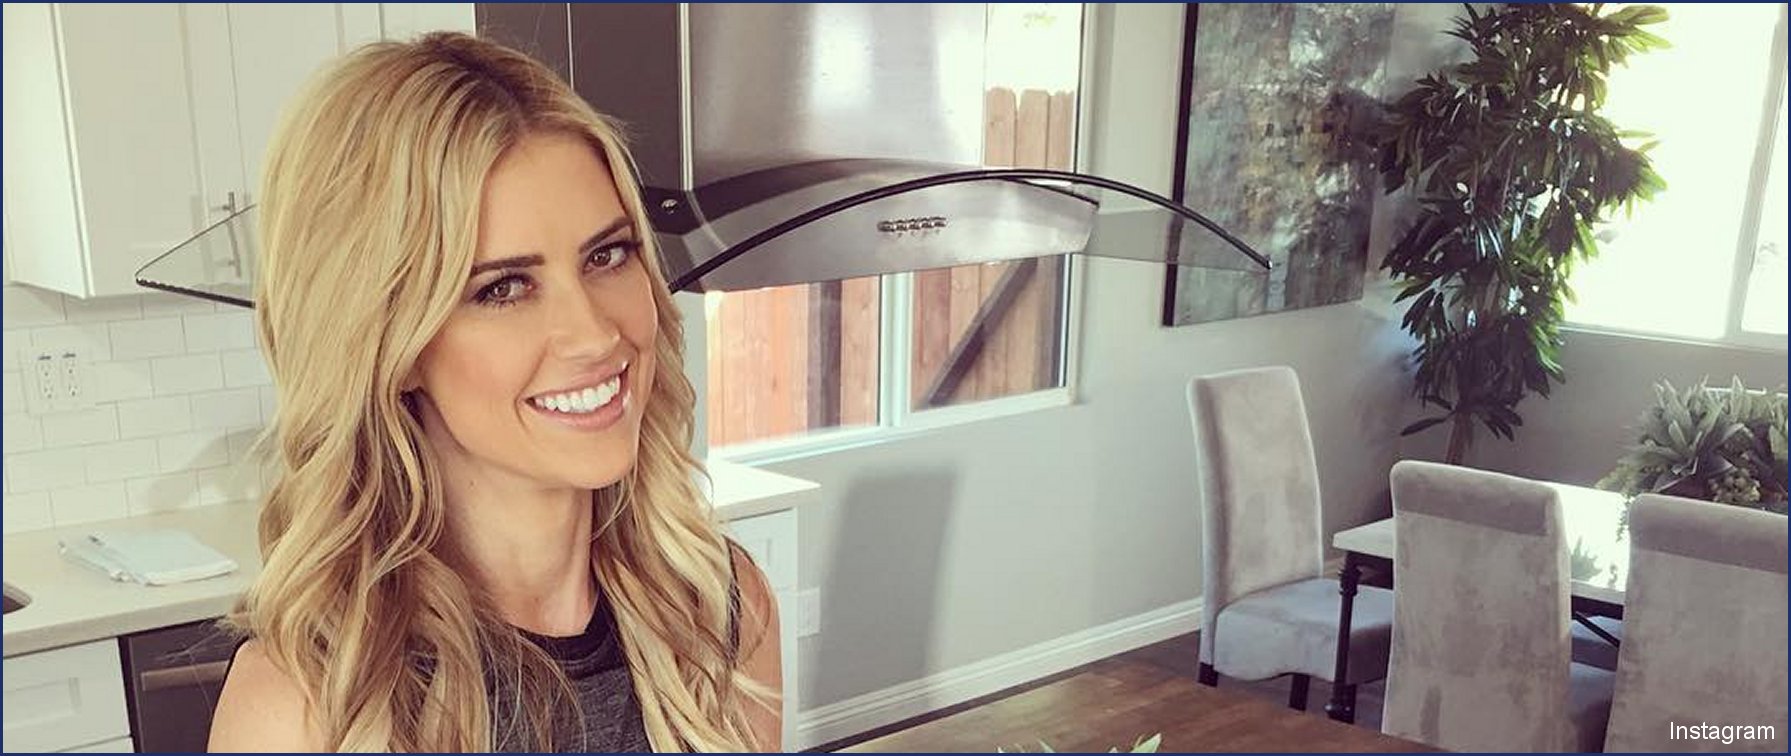 Christina Anstead Confirms Gender Of Baby With Ant Anstead After Ex Husband Tarek El Moussa Accidentally Reveals It,Paint Chocolate Brown Color Combination